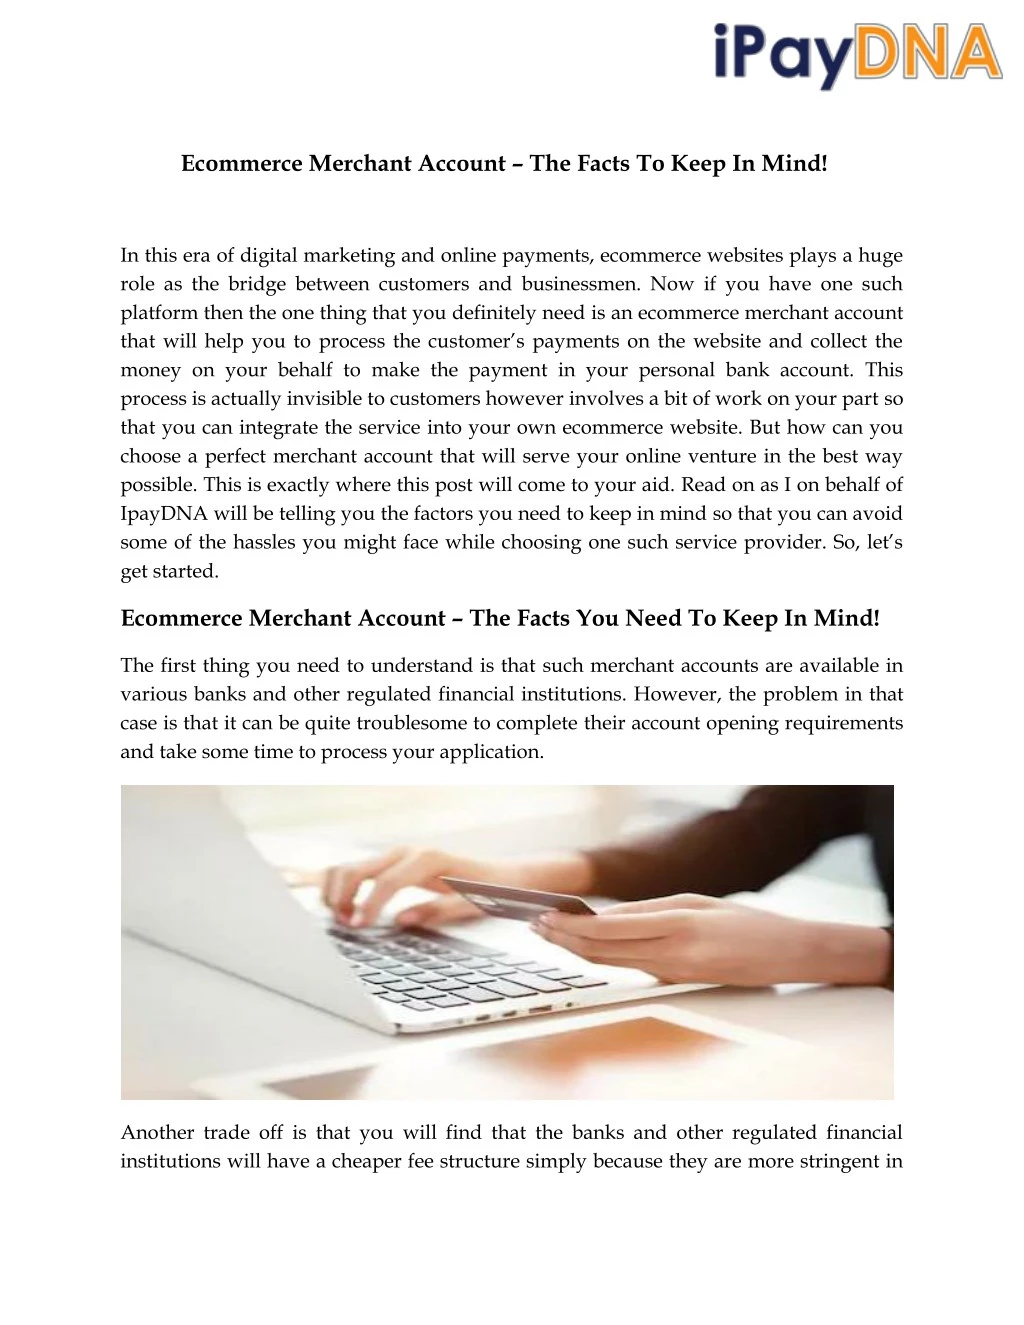 ecommerce merchant account the facts to keep